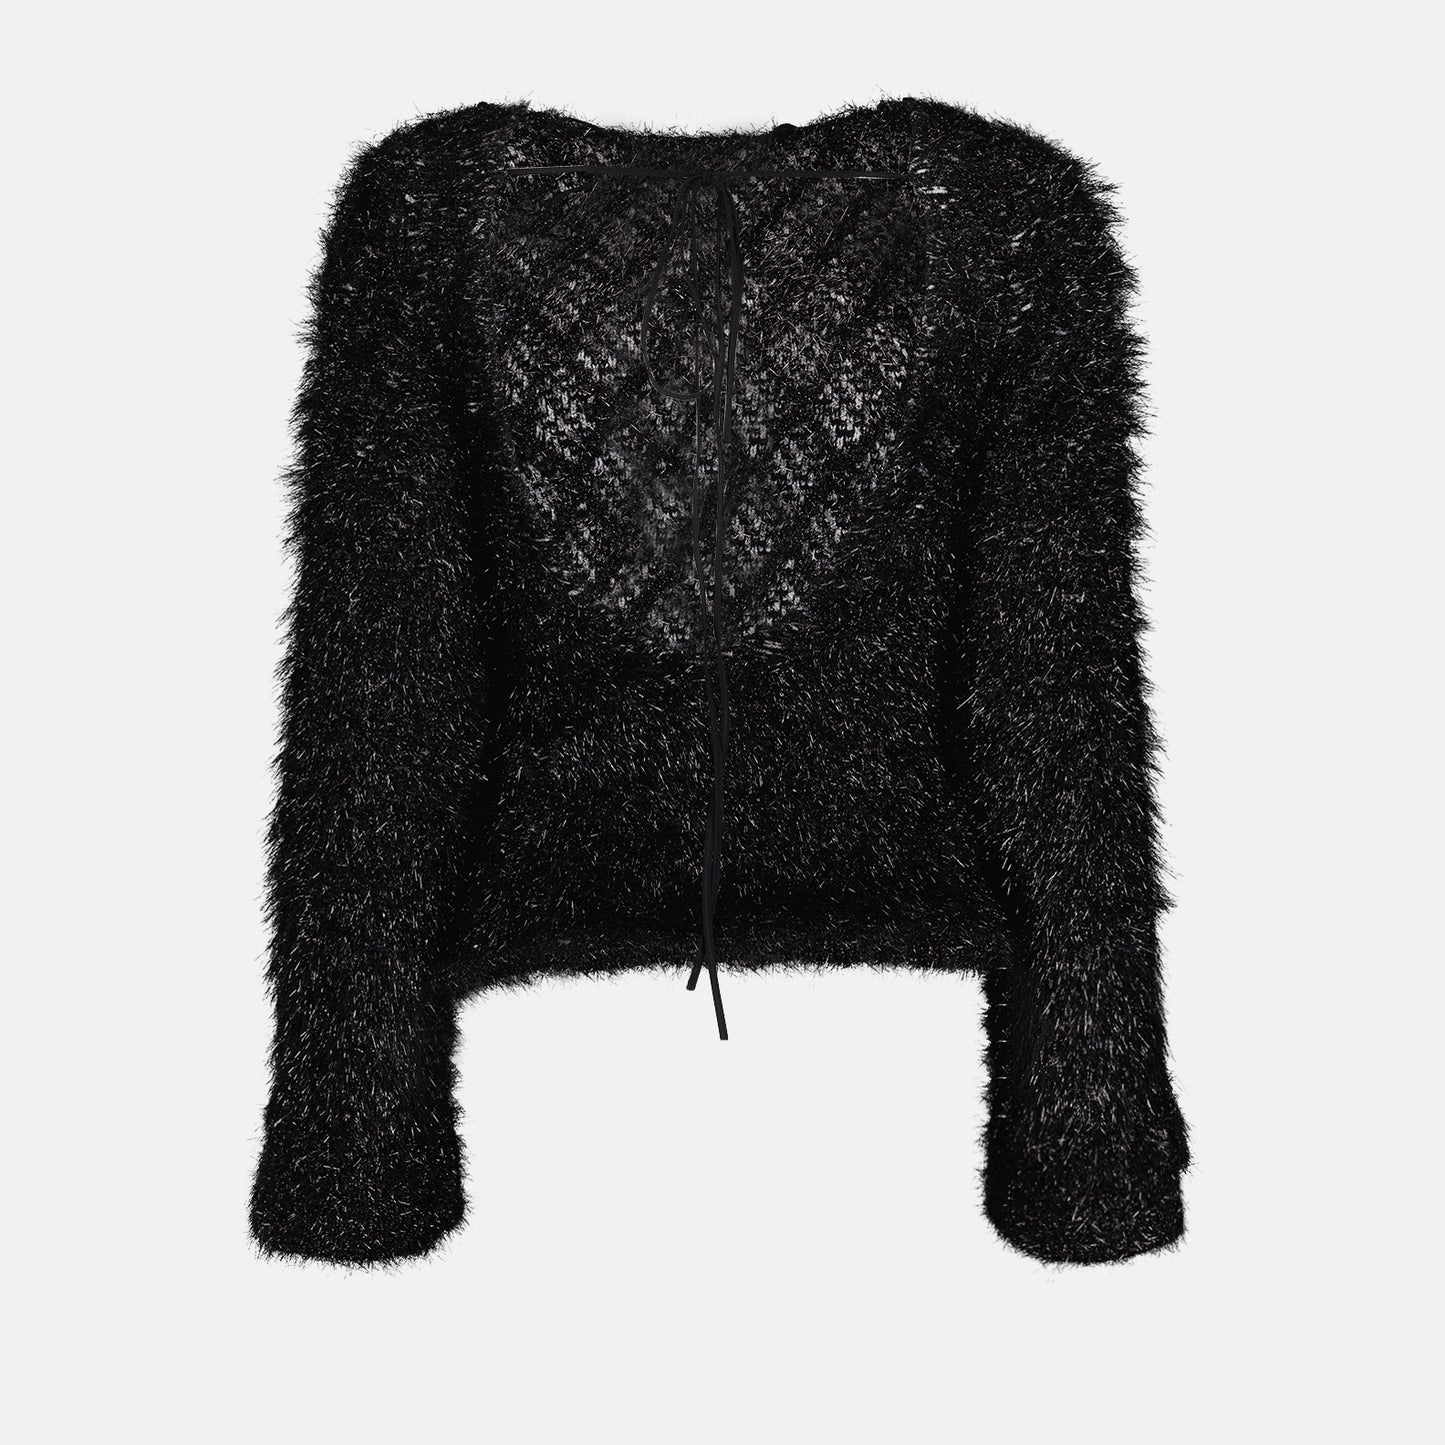 Open back textured sweater